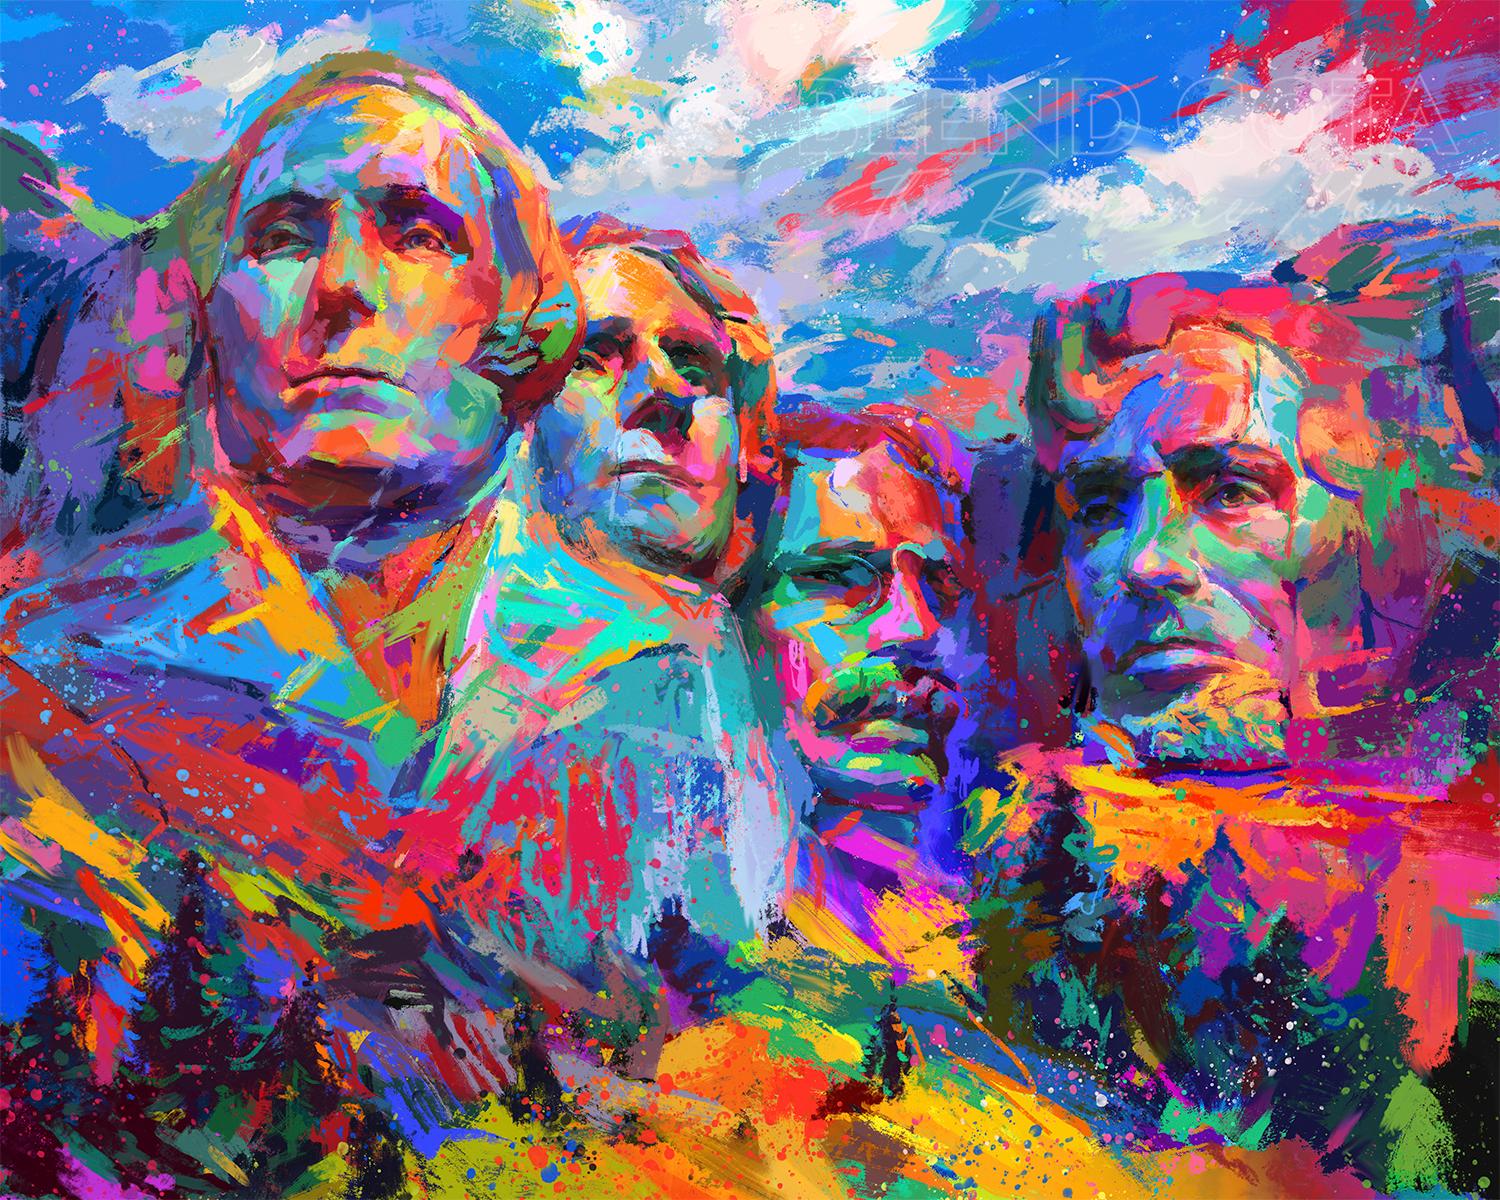 Mount Rushmore - Hope For a Brighter Future (Limited Edition on Metal) - Painting by Blend Cota